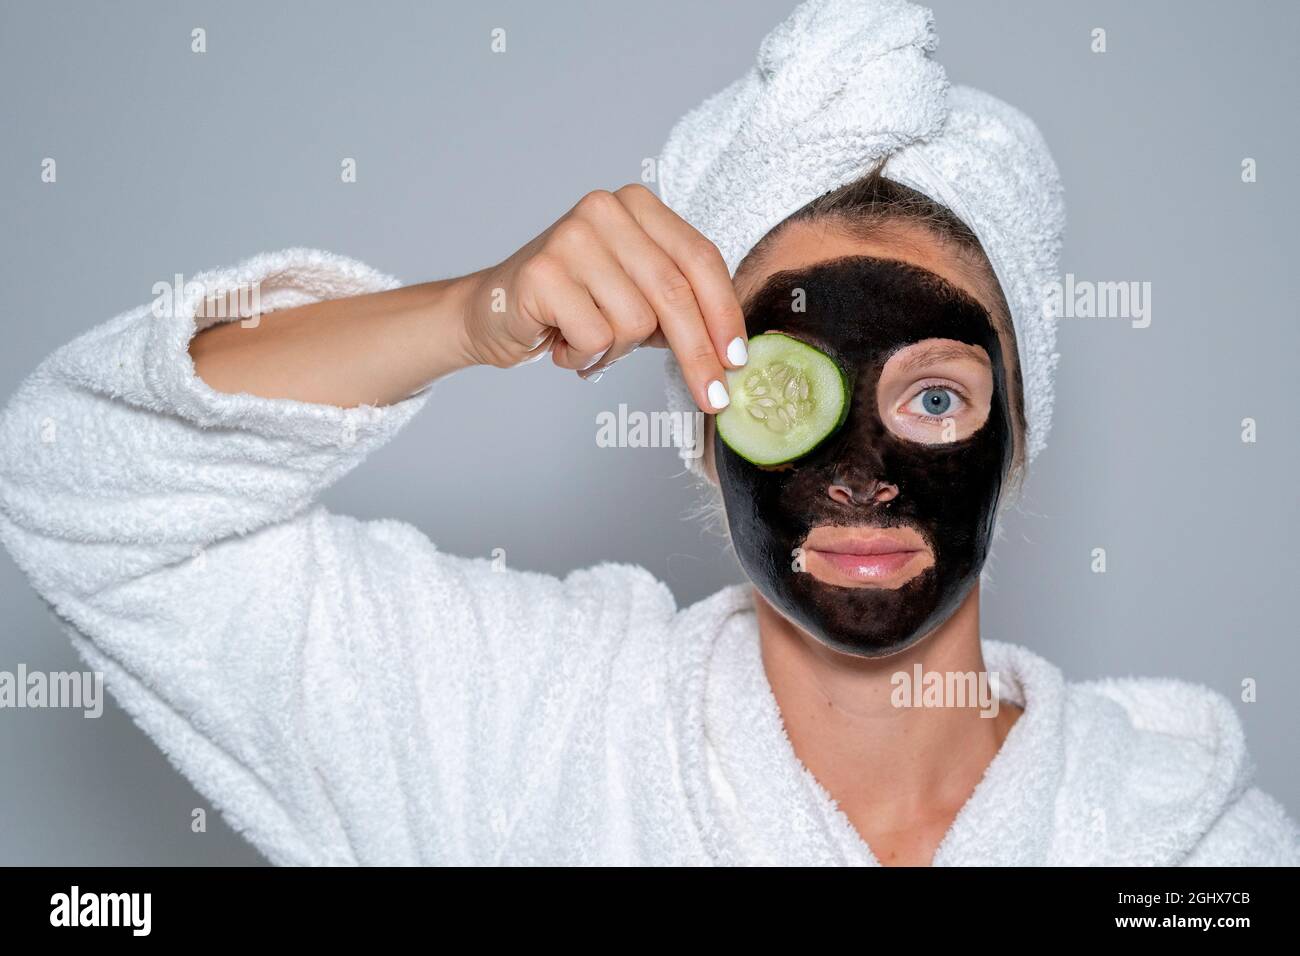 Young woman at home spa with black facial mask grabbing a cucumber slice. Wellness concept face treatment Stock Photo